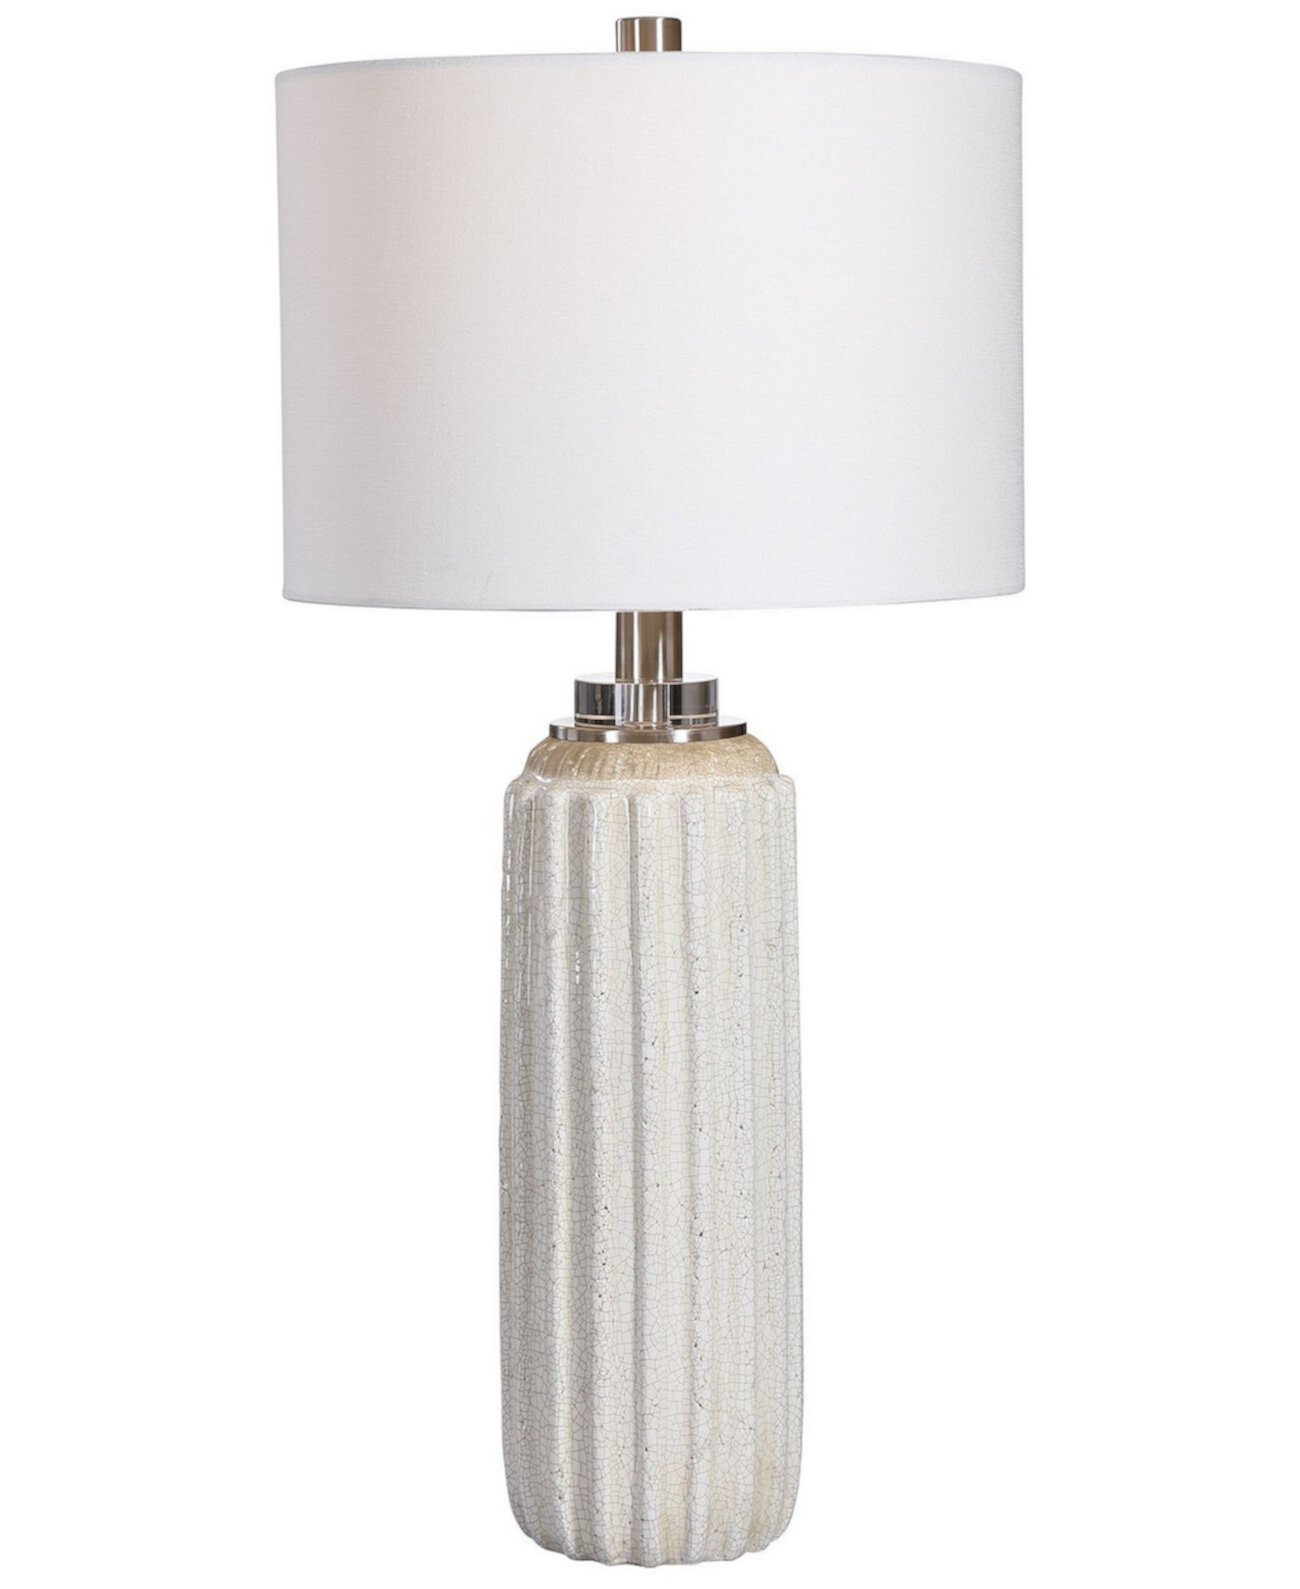 Mountainscape Table Lamp Uttermost